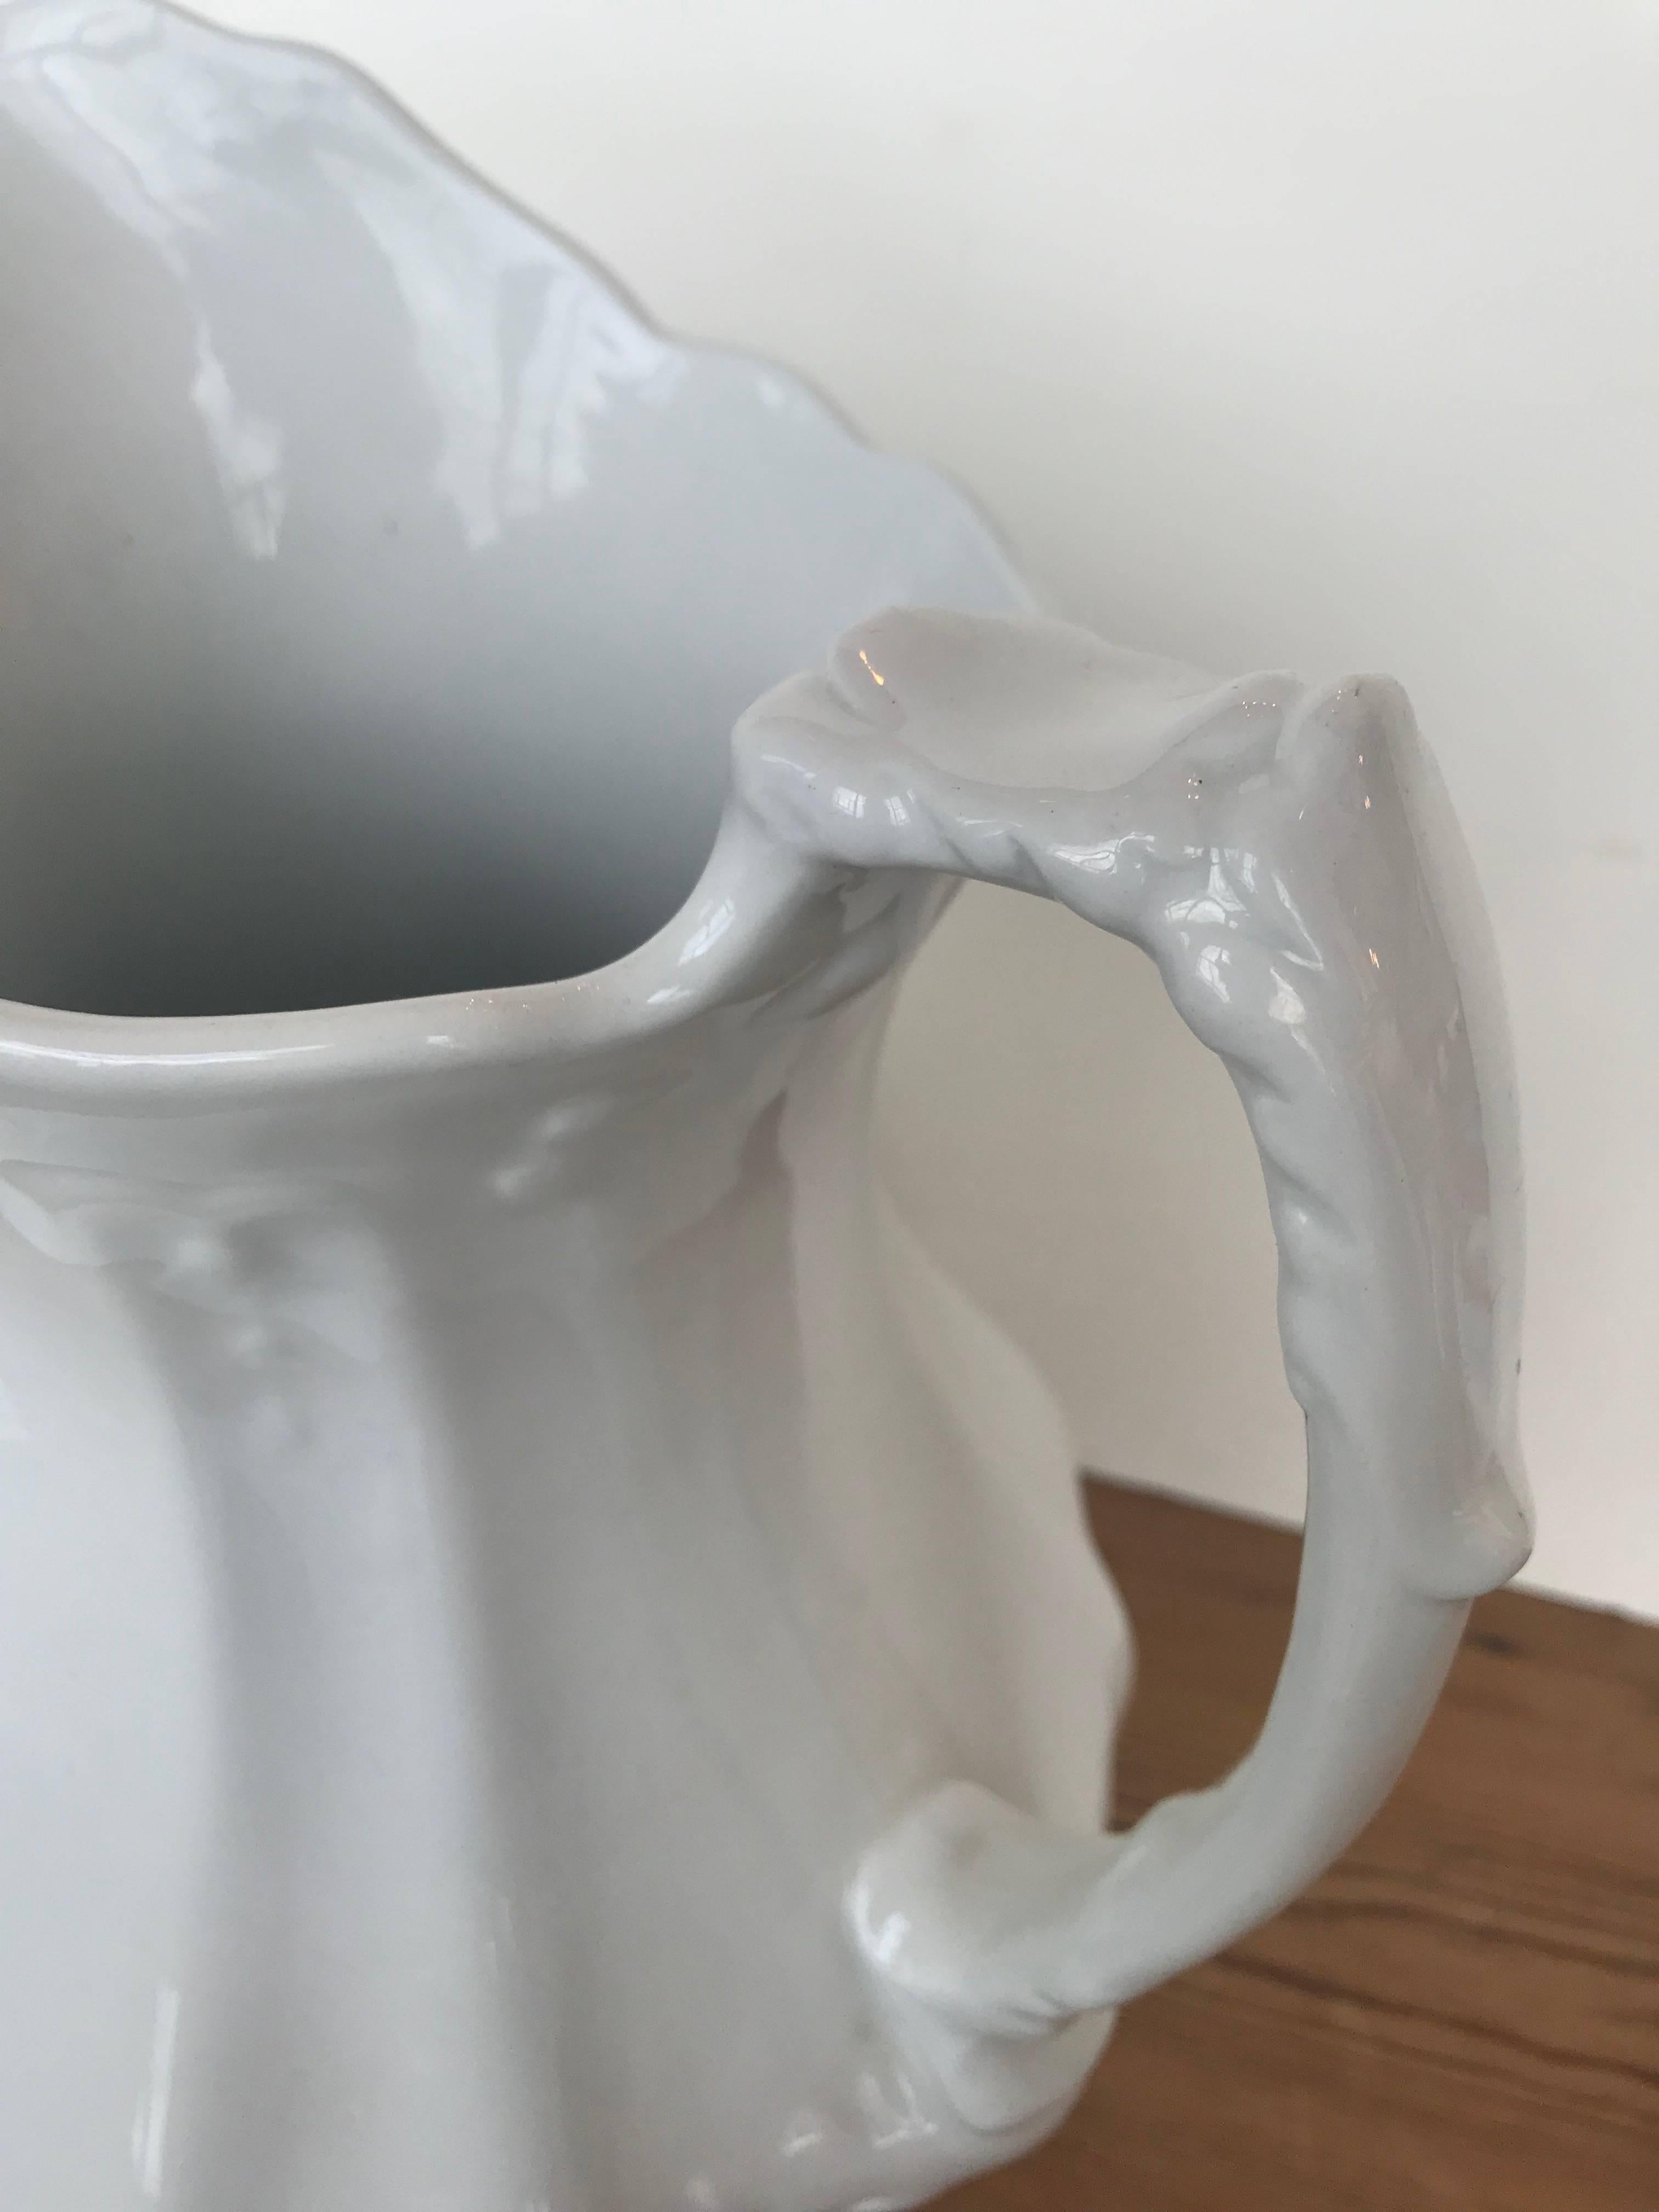 Ironstone Johnson Bros. Pitcher In Excellent Condition For Sale In Boston, MA